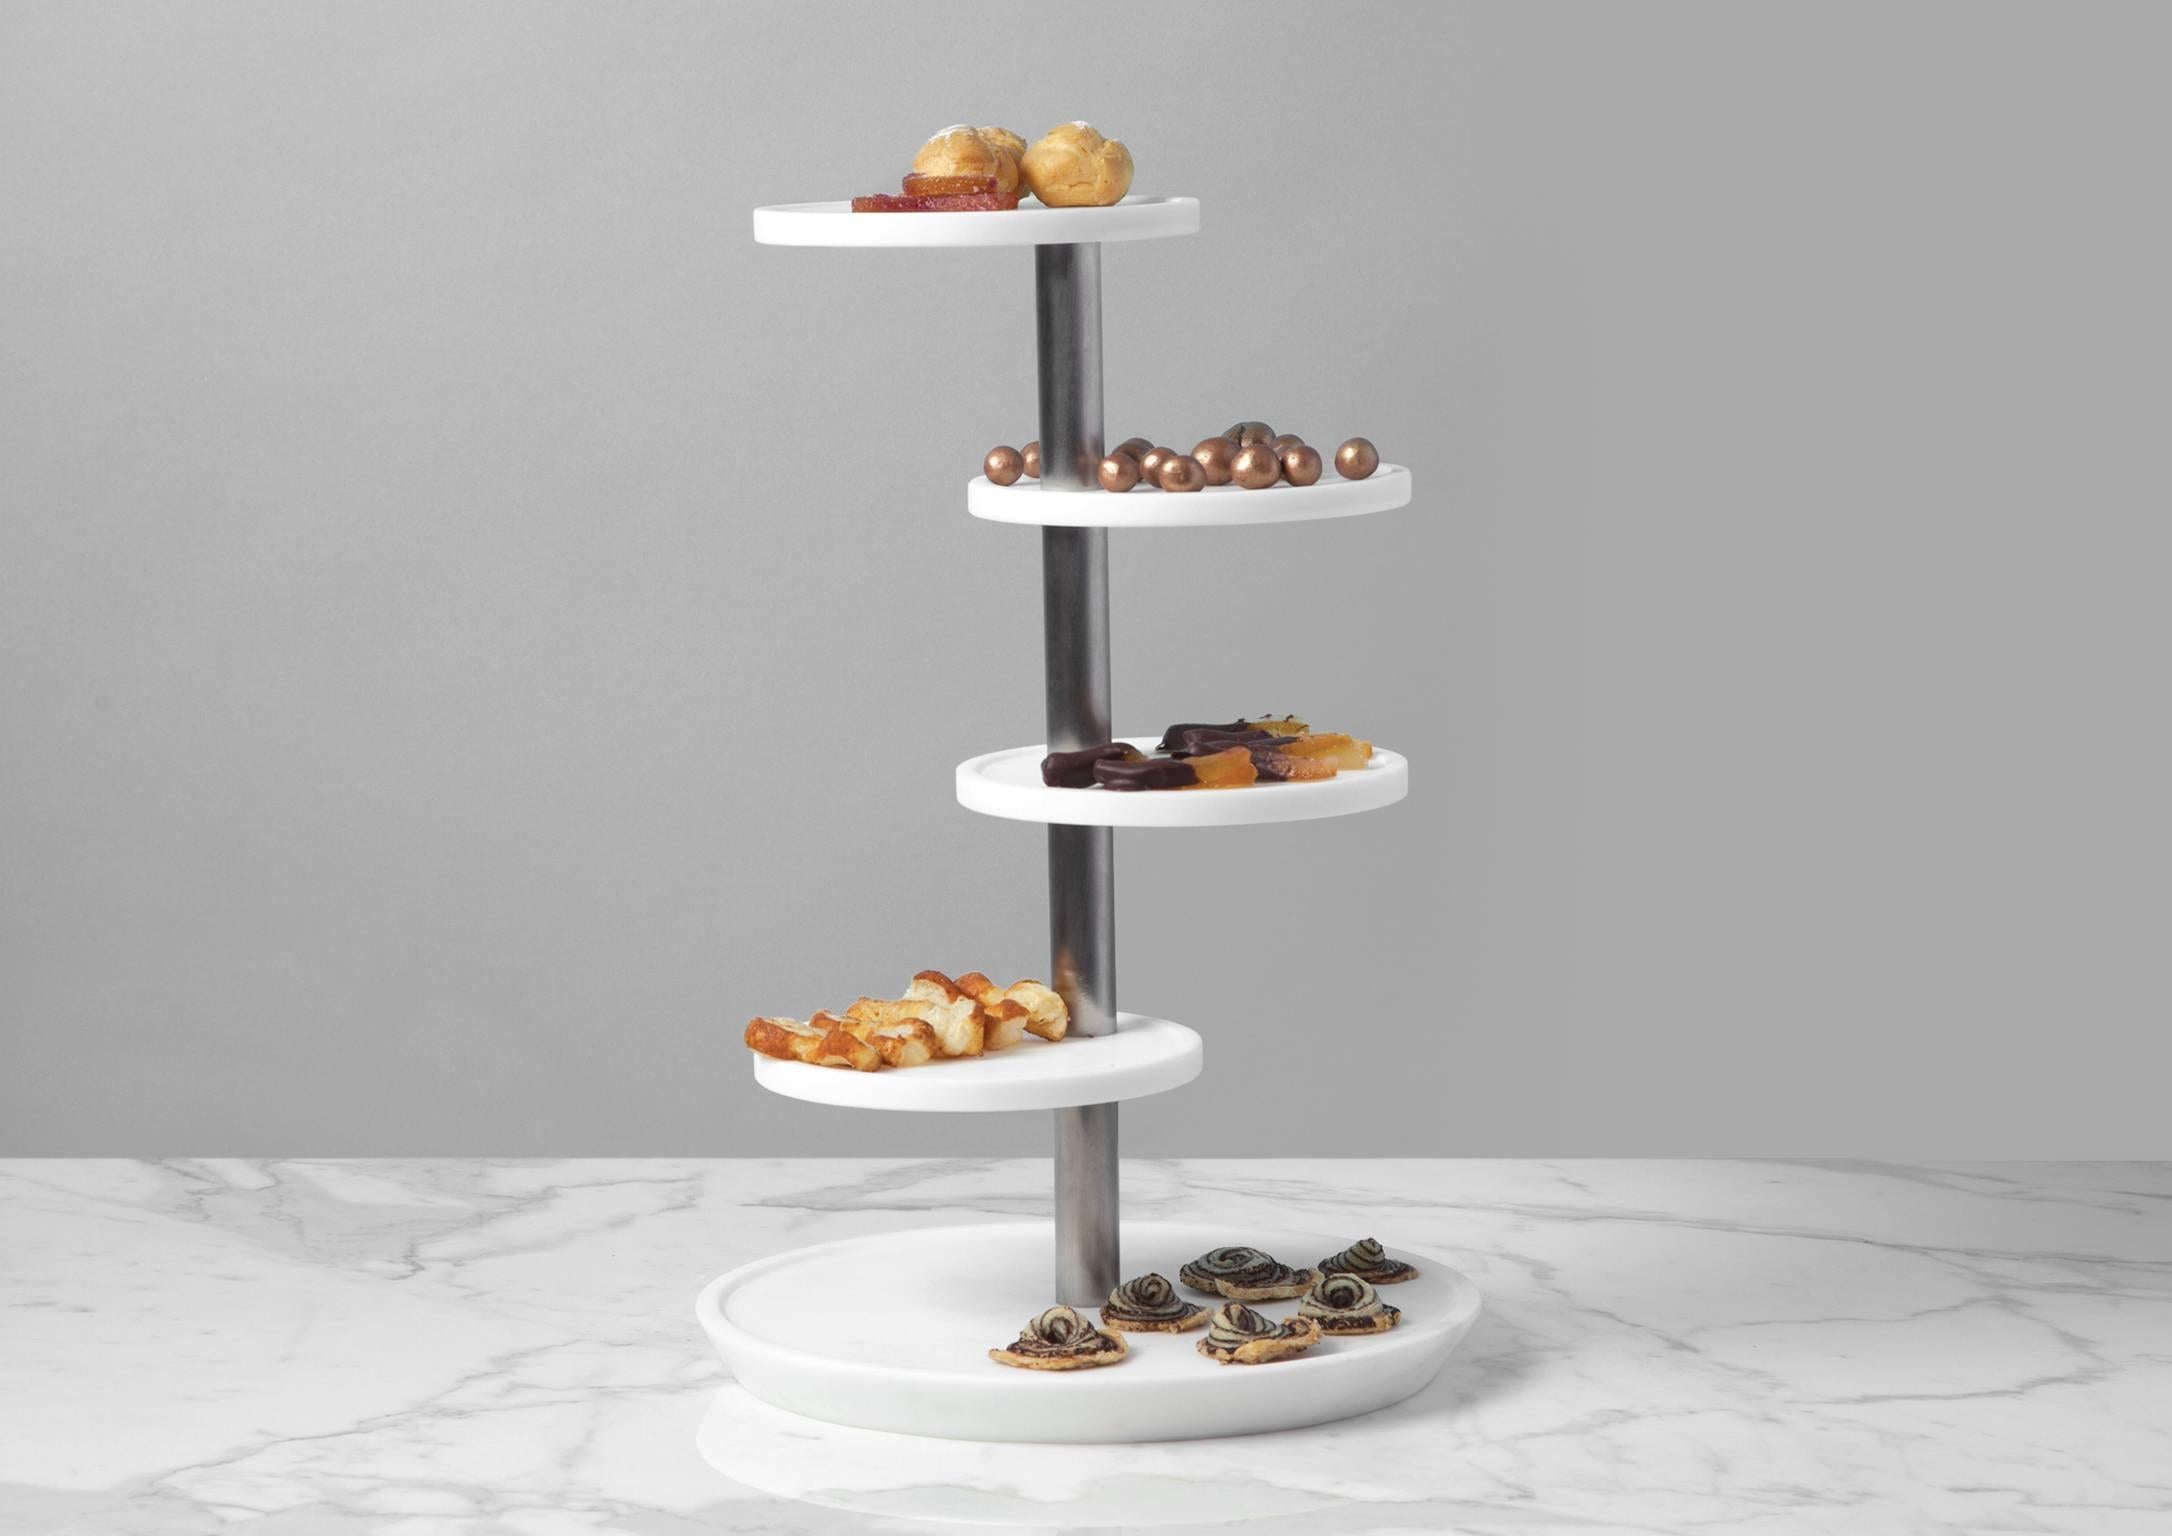 Magical and elegant appetizers or dessert tray. Five tiers with smooth and welcoming surfaces accommodate amuse-bouche and small delights. PRE will define aperitifs and banquets. Size: 30*44 cm, smooth finishing. Commercial name: PRE, Magnolia Table